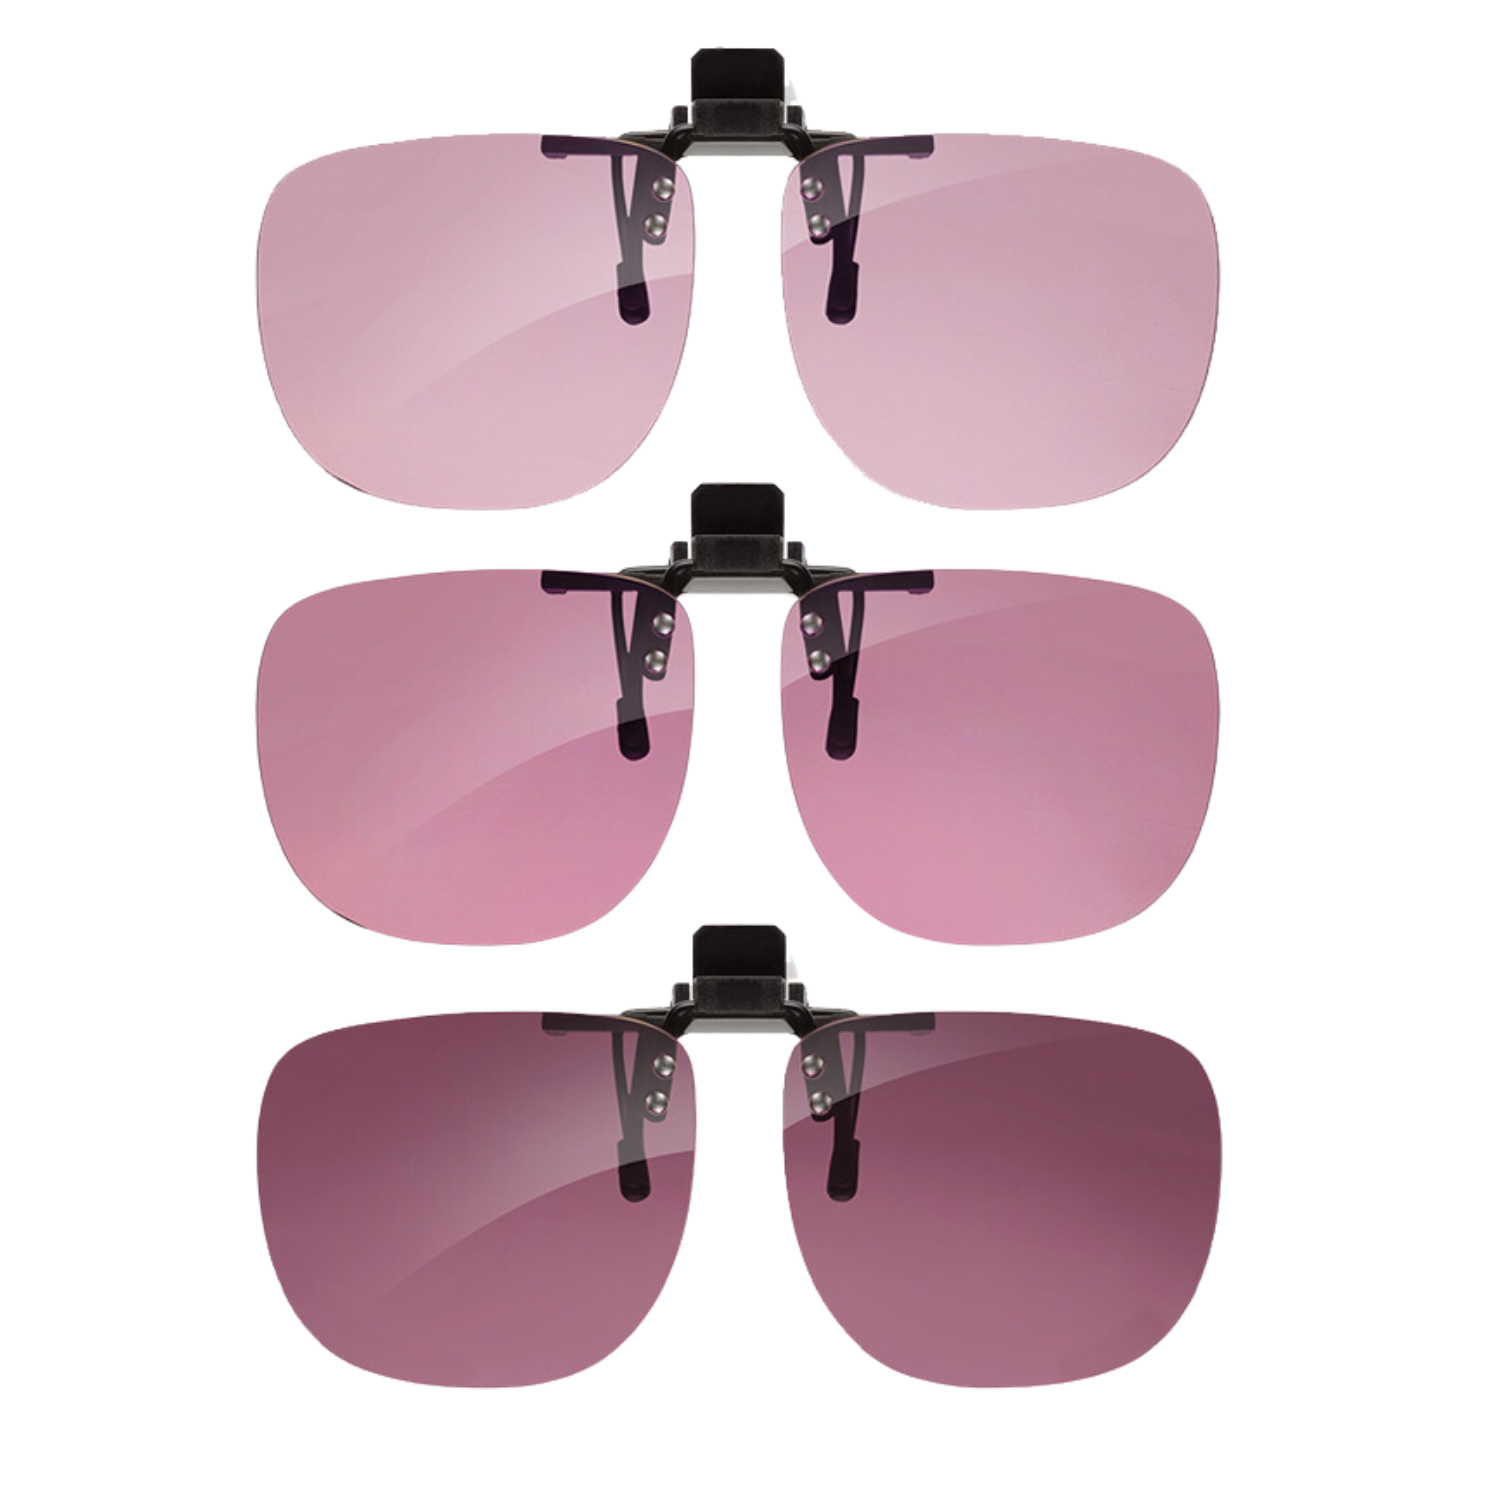 Image showing the 25%, 50%, and 75% Rose tint options for Eschenbach's Clip-on FL-41 lenses.